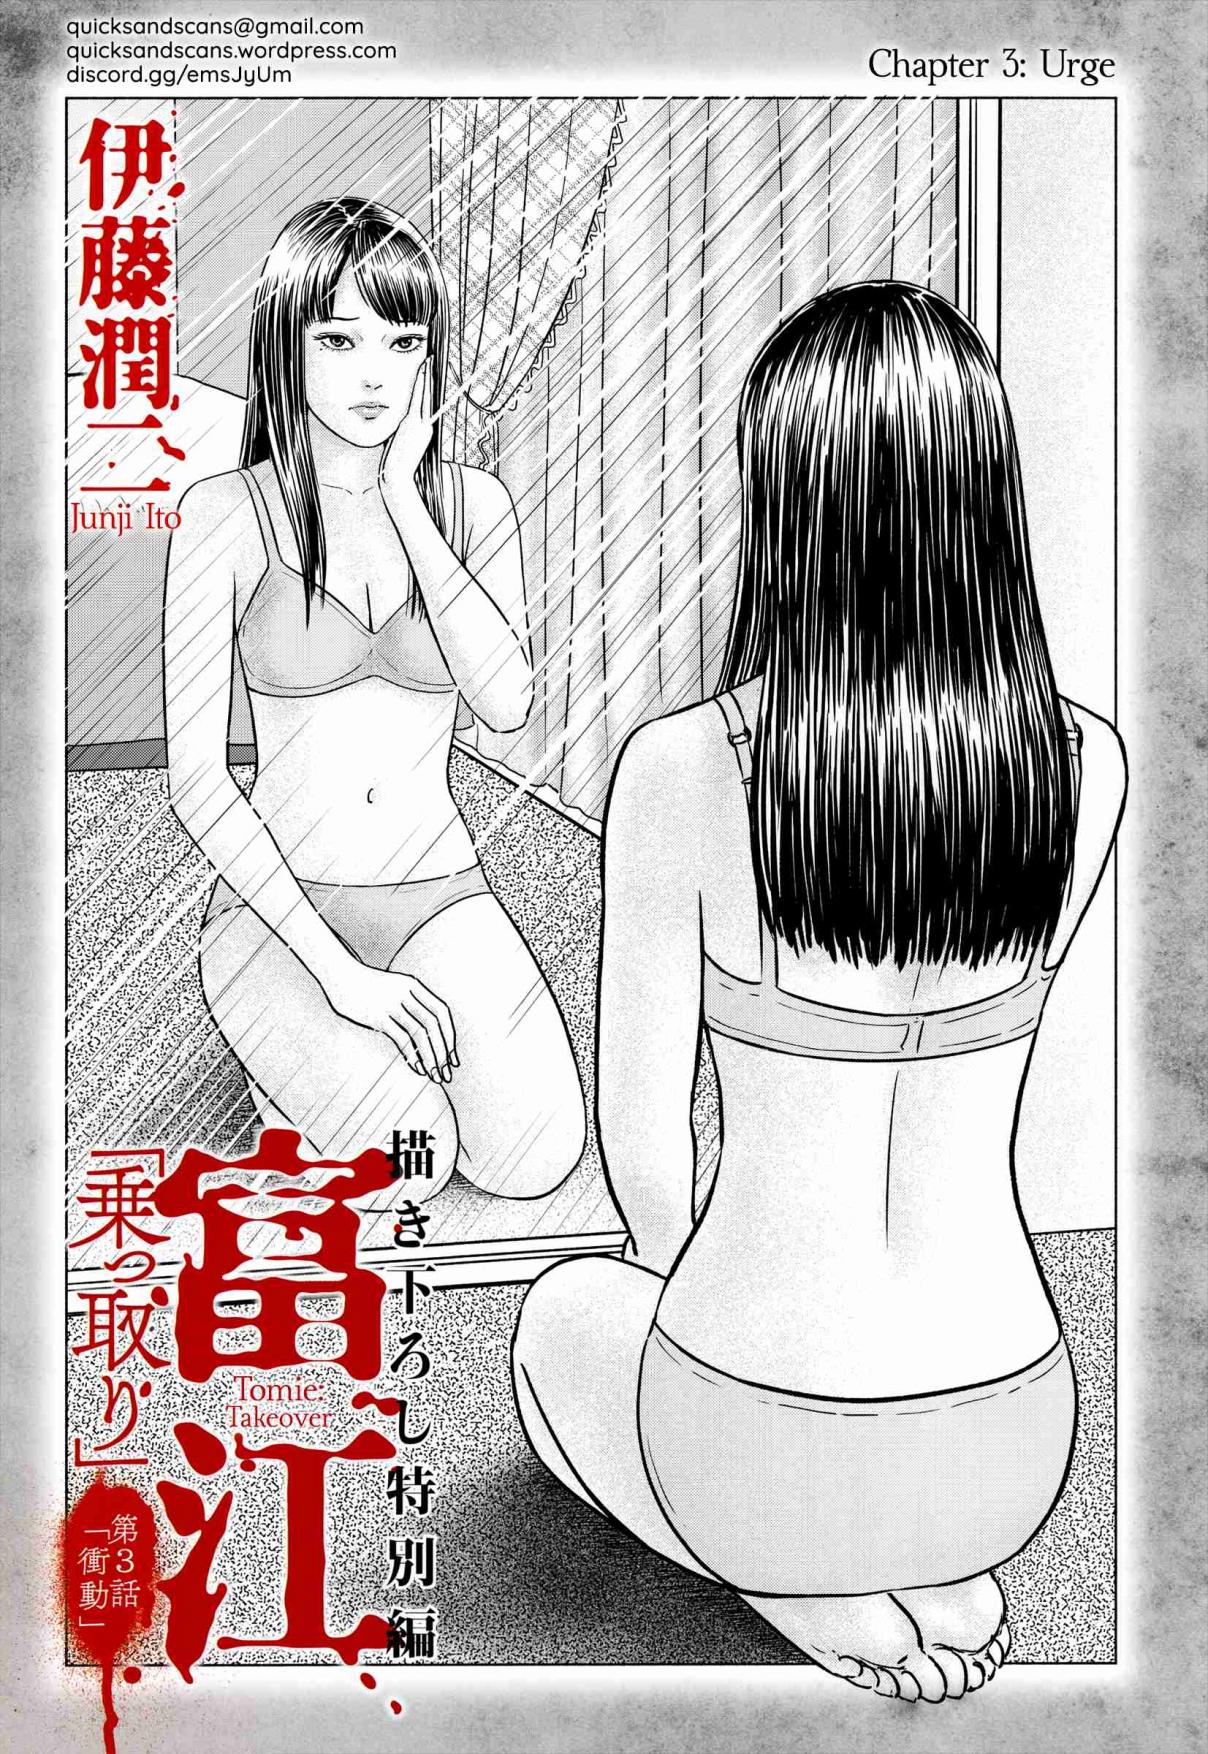 Tomie: Takeover Ch. 3 Urge